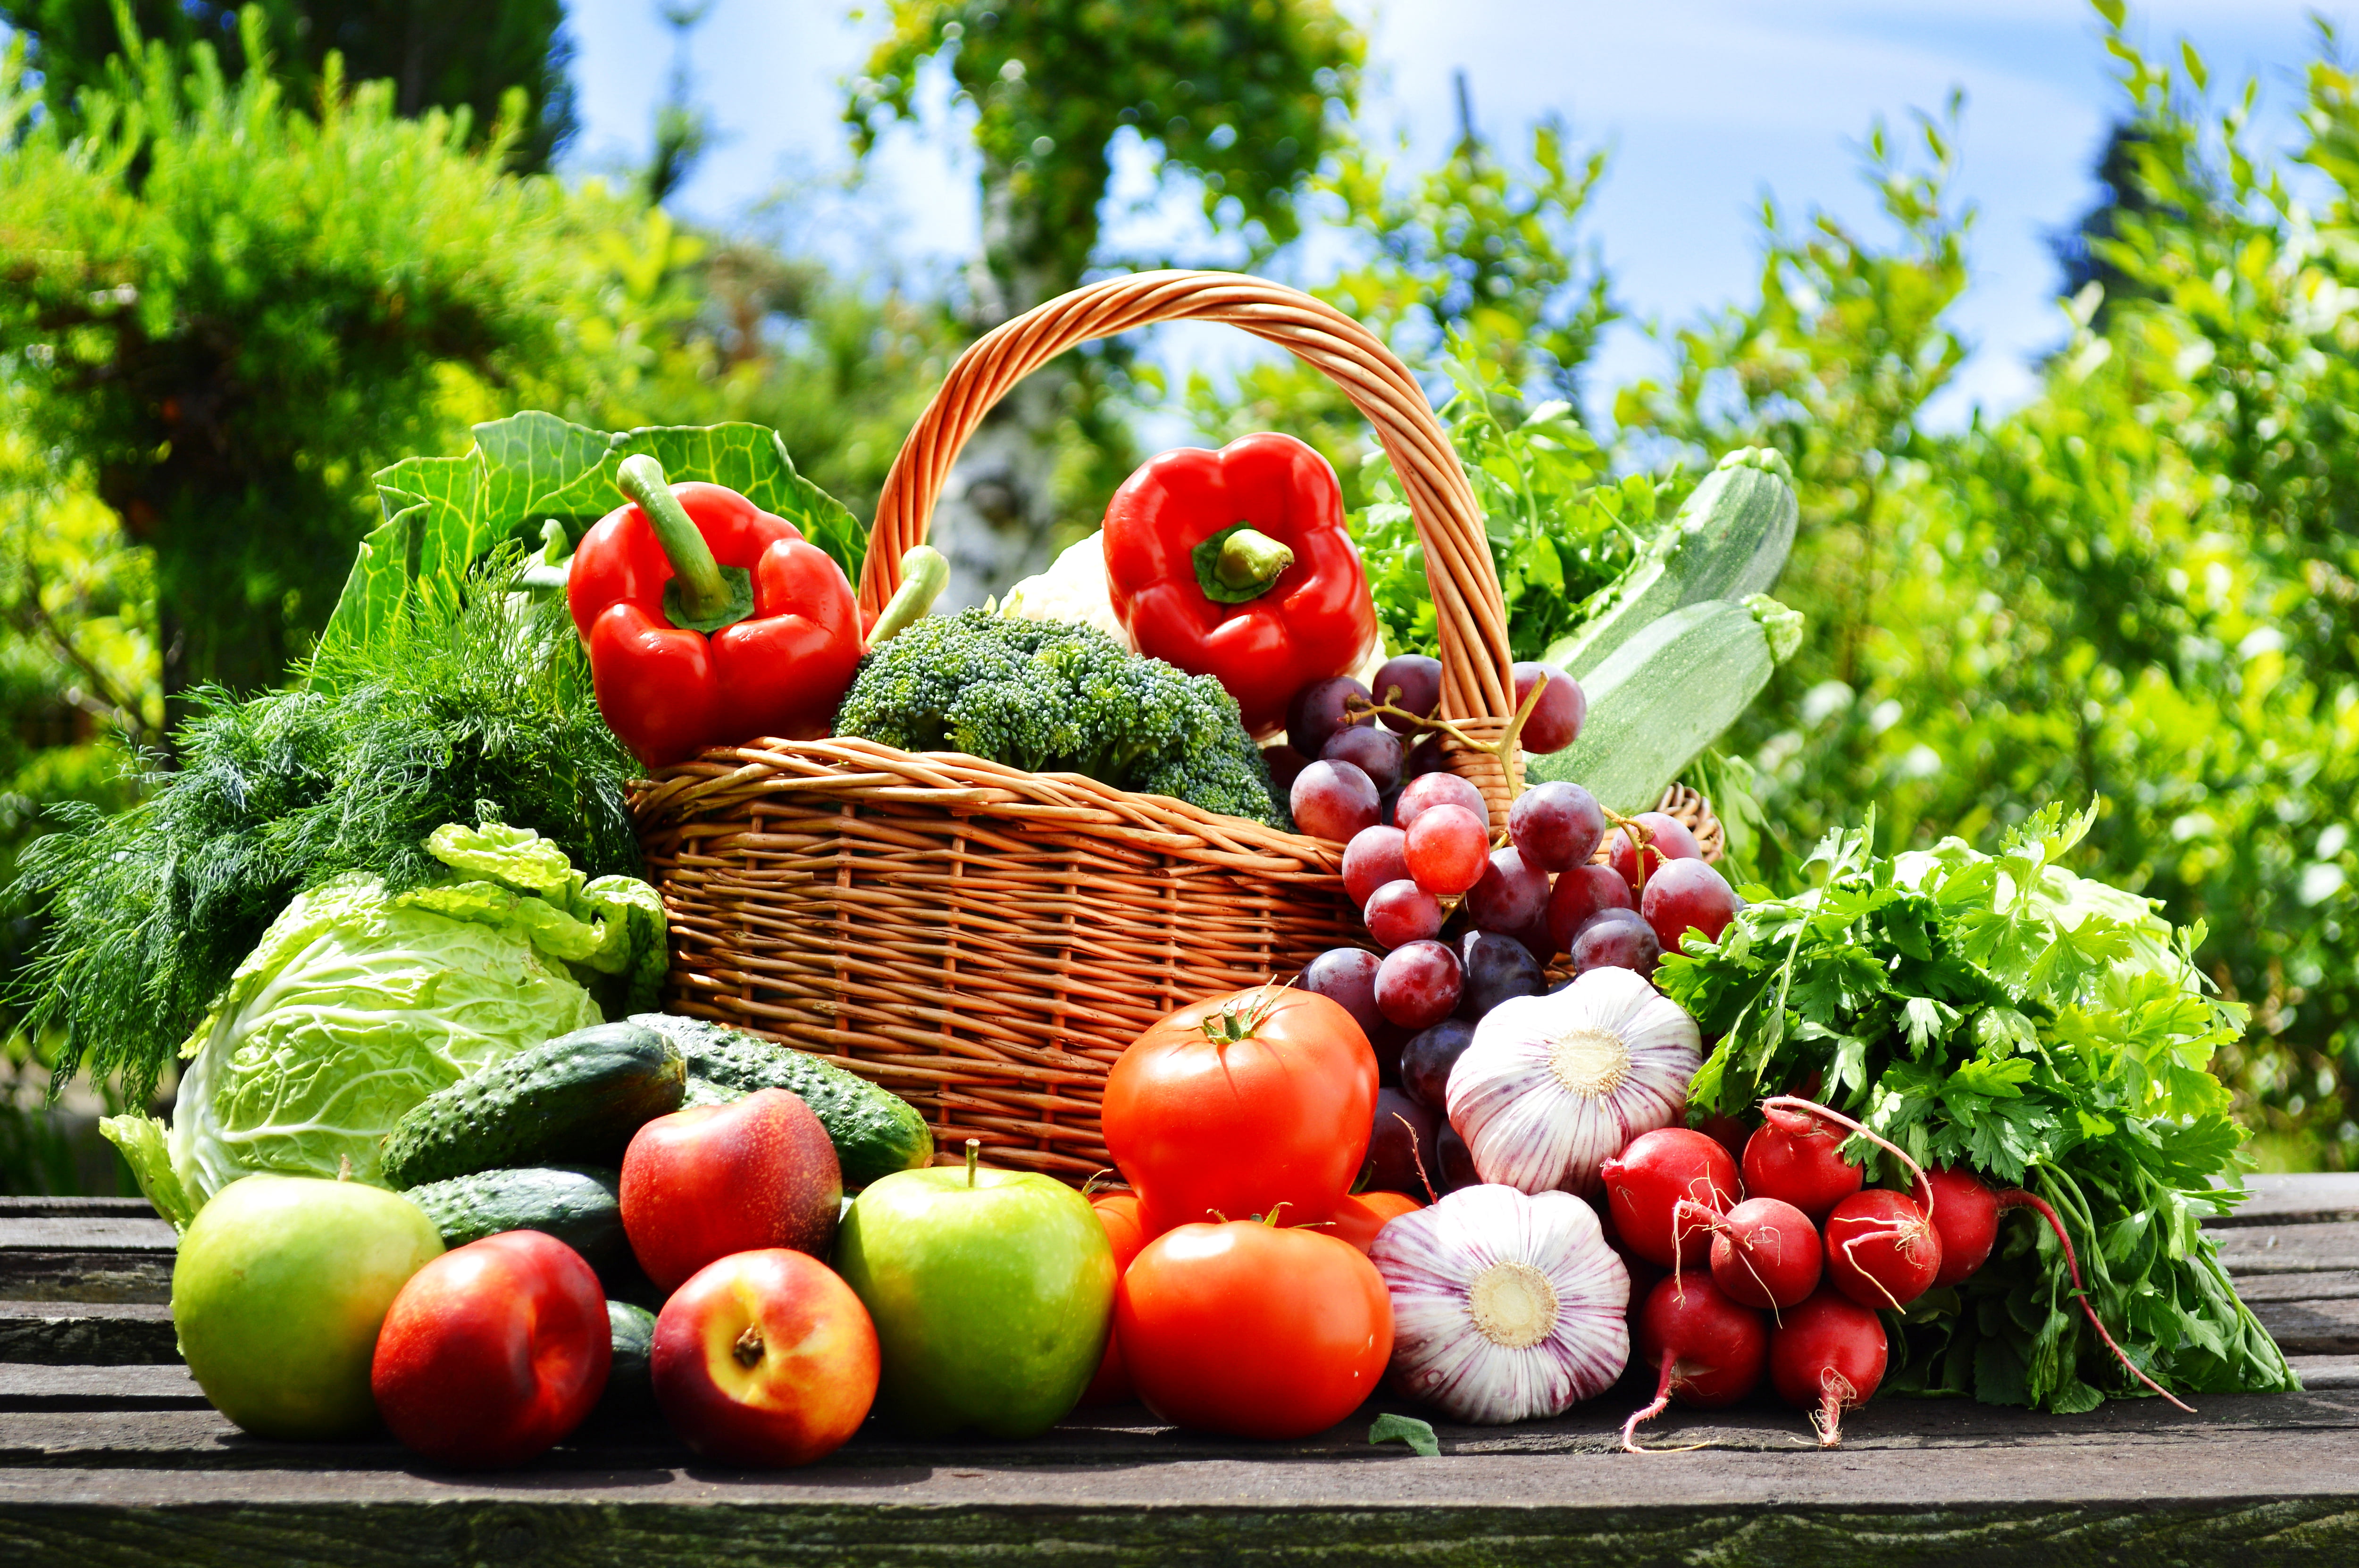 assorted fruits and vegetables, nature, basket, apples, grapes